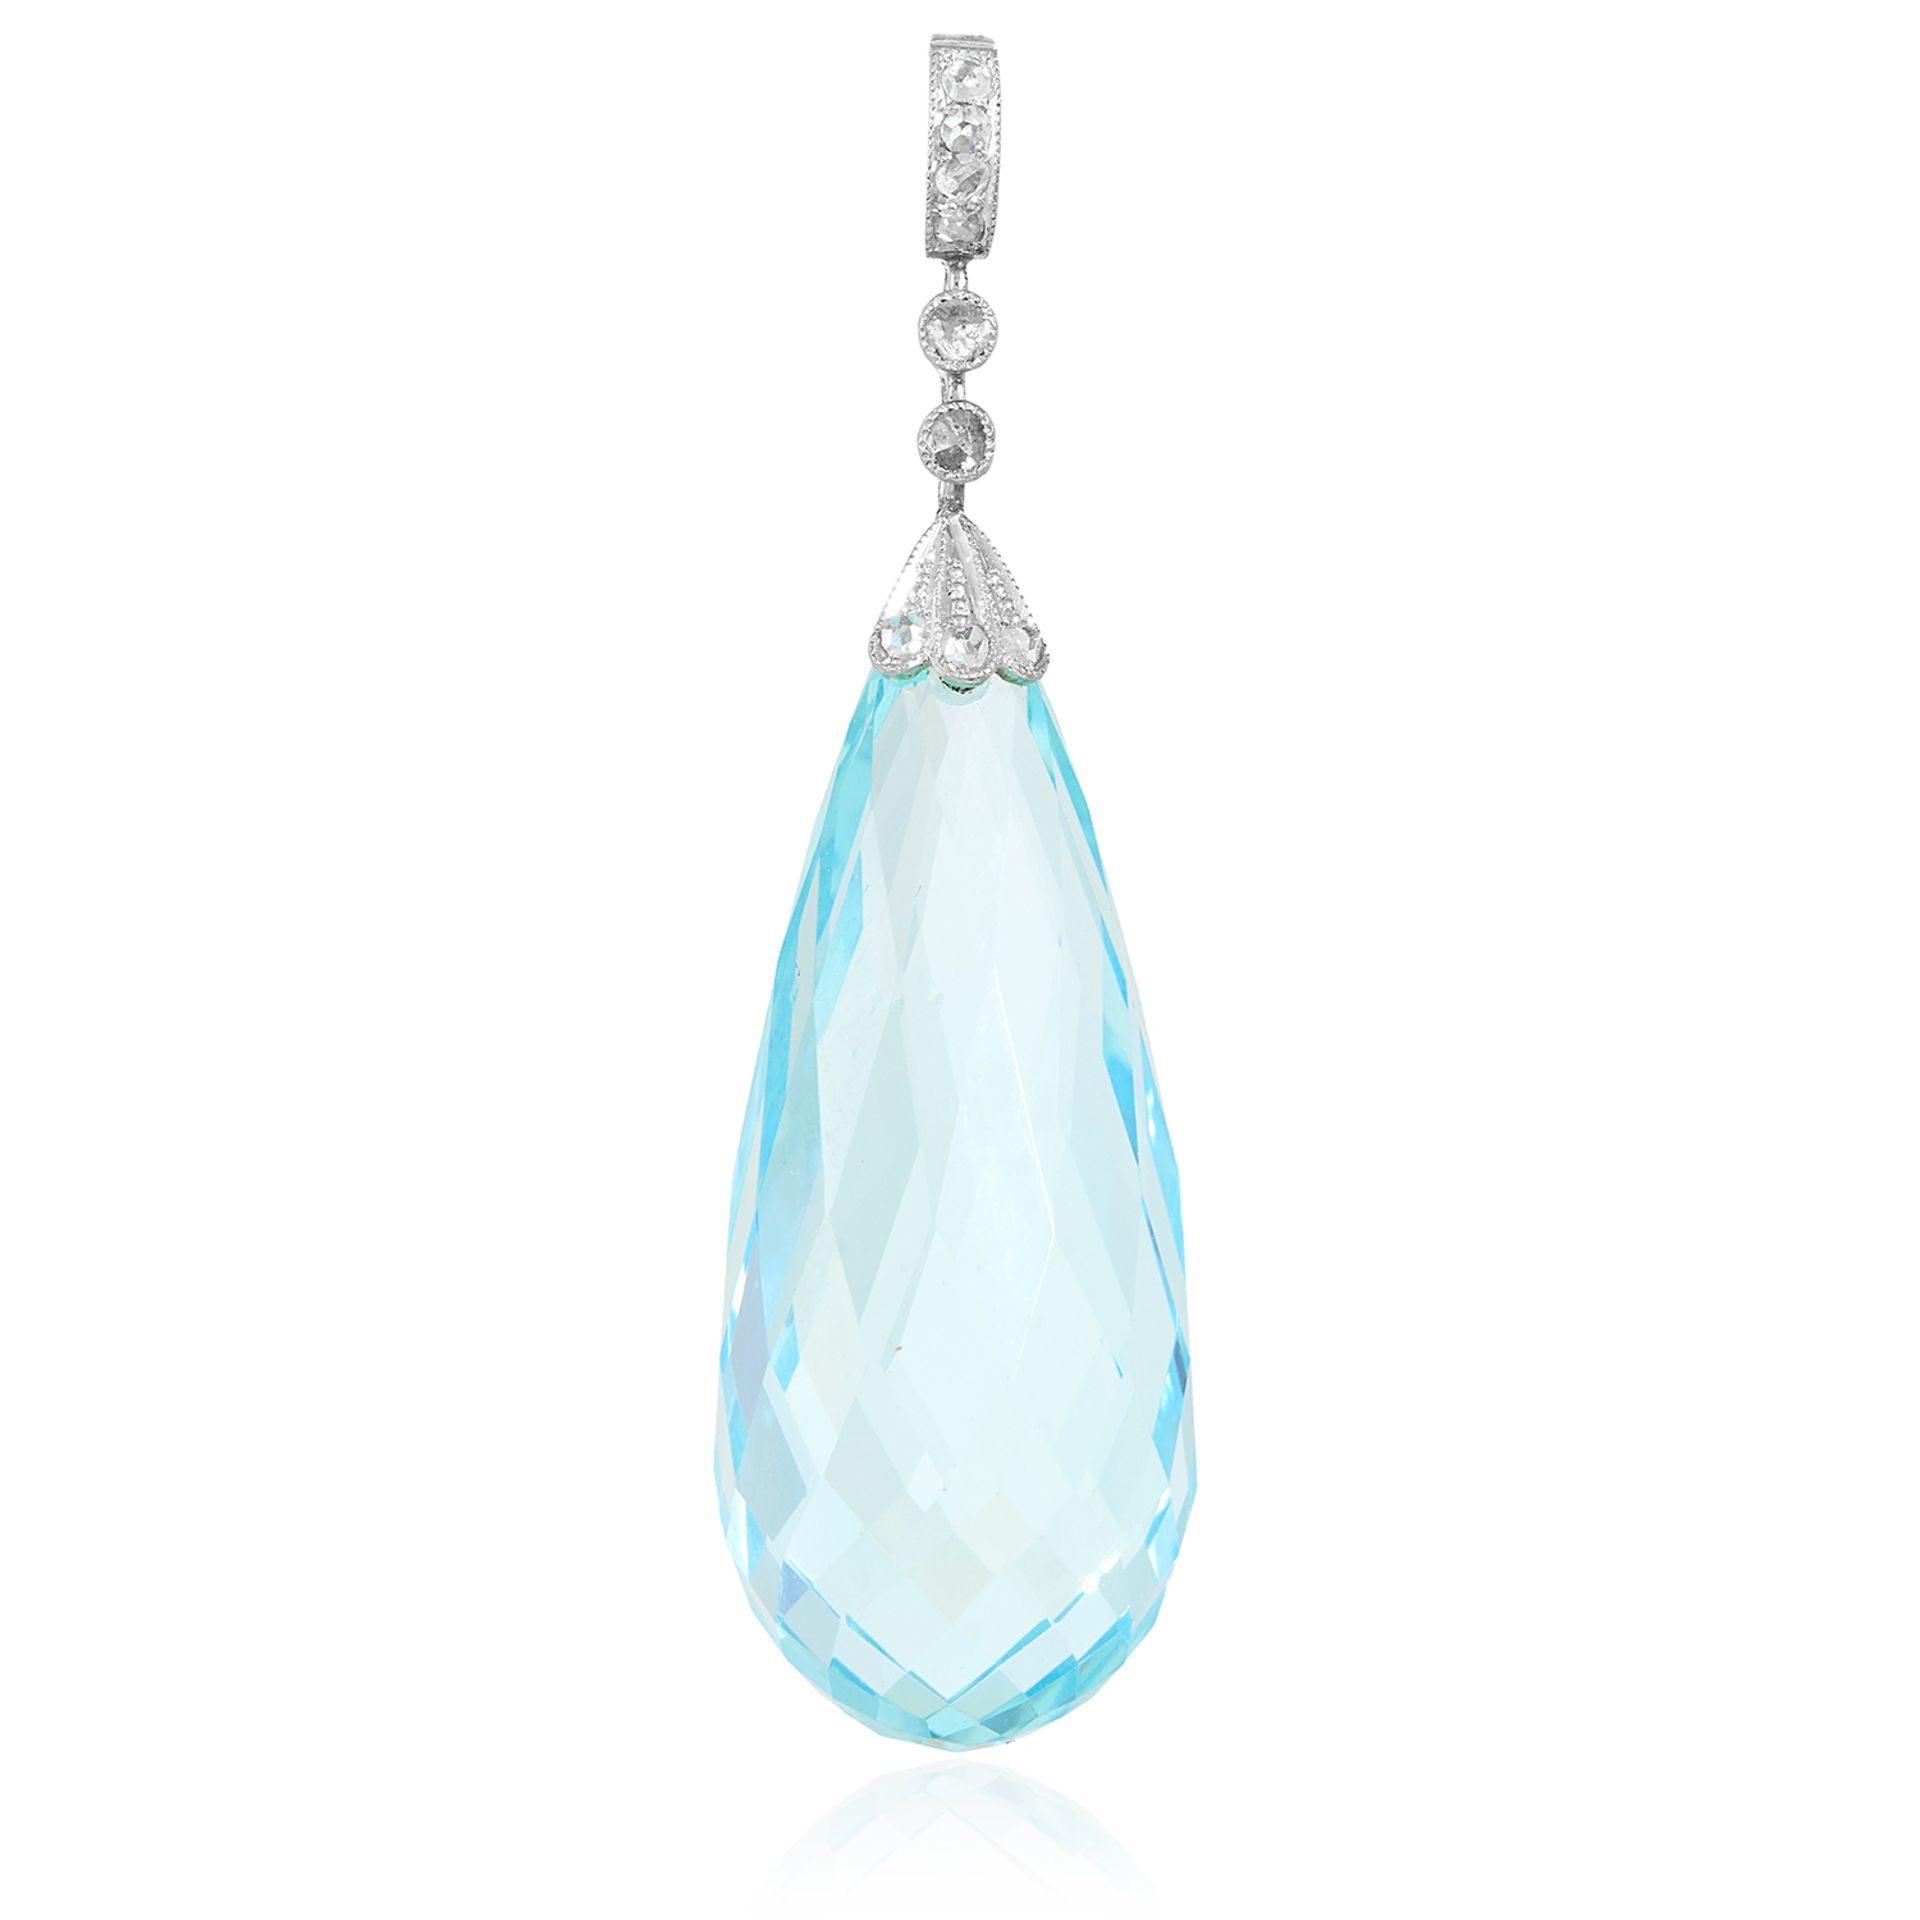 AN ANTIQUE AQUAMARINE AND DIAMOND PENDANT in yellow gold and silver, set with a tapering briolette